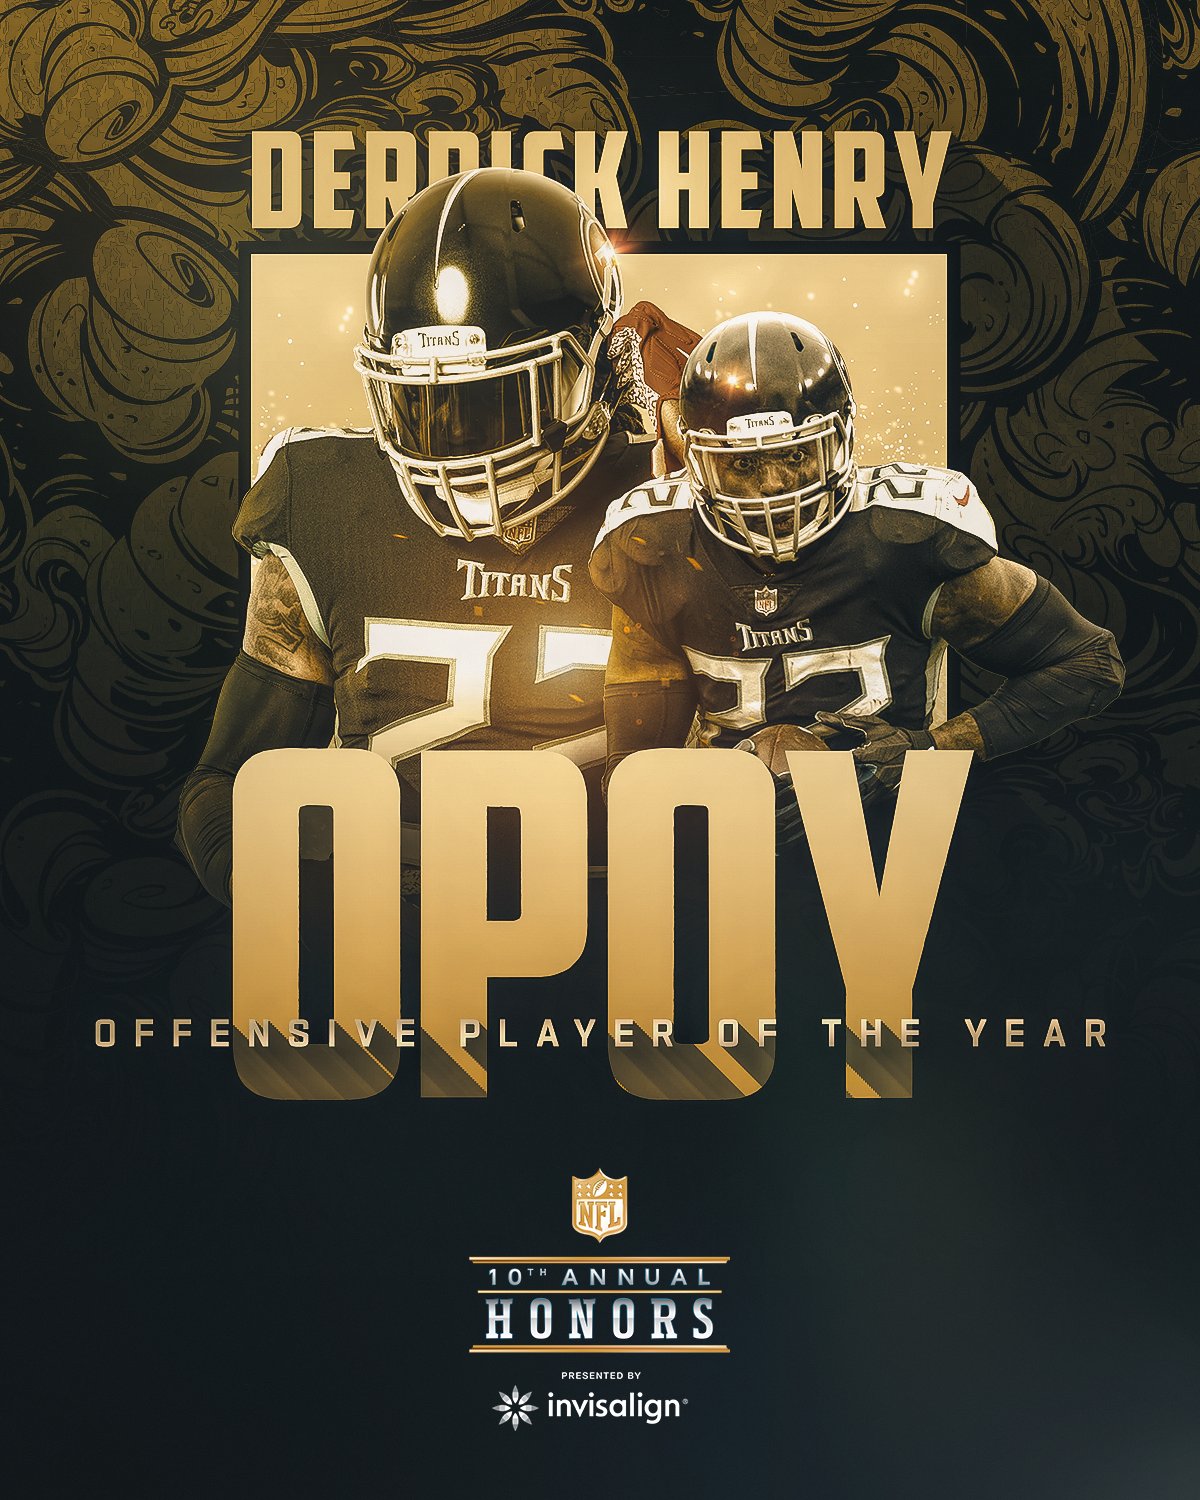 Offensive Player of the Year: RB Derrick Henry, Titans